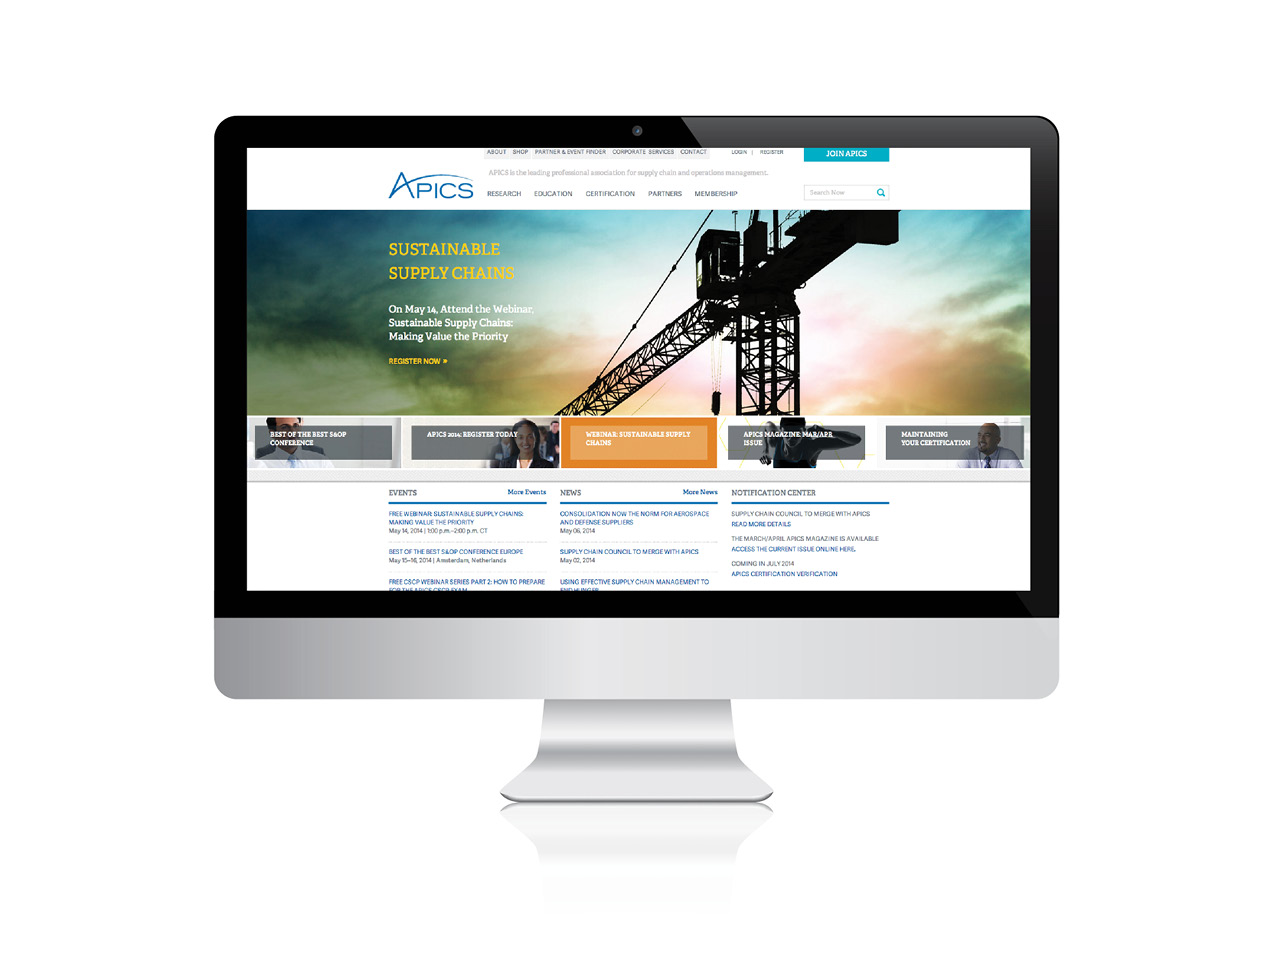  The APICS website was redesigned as part of a company rebrand in 2013. 